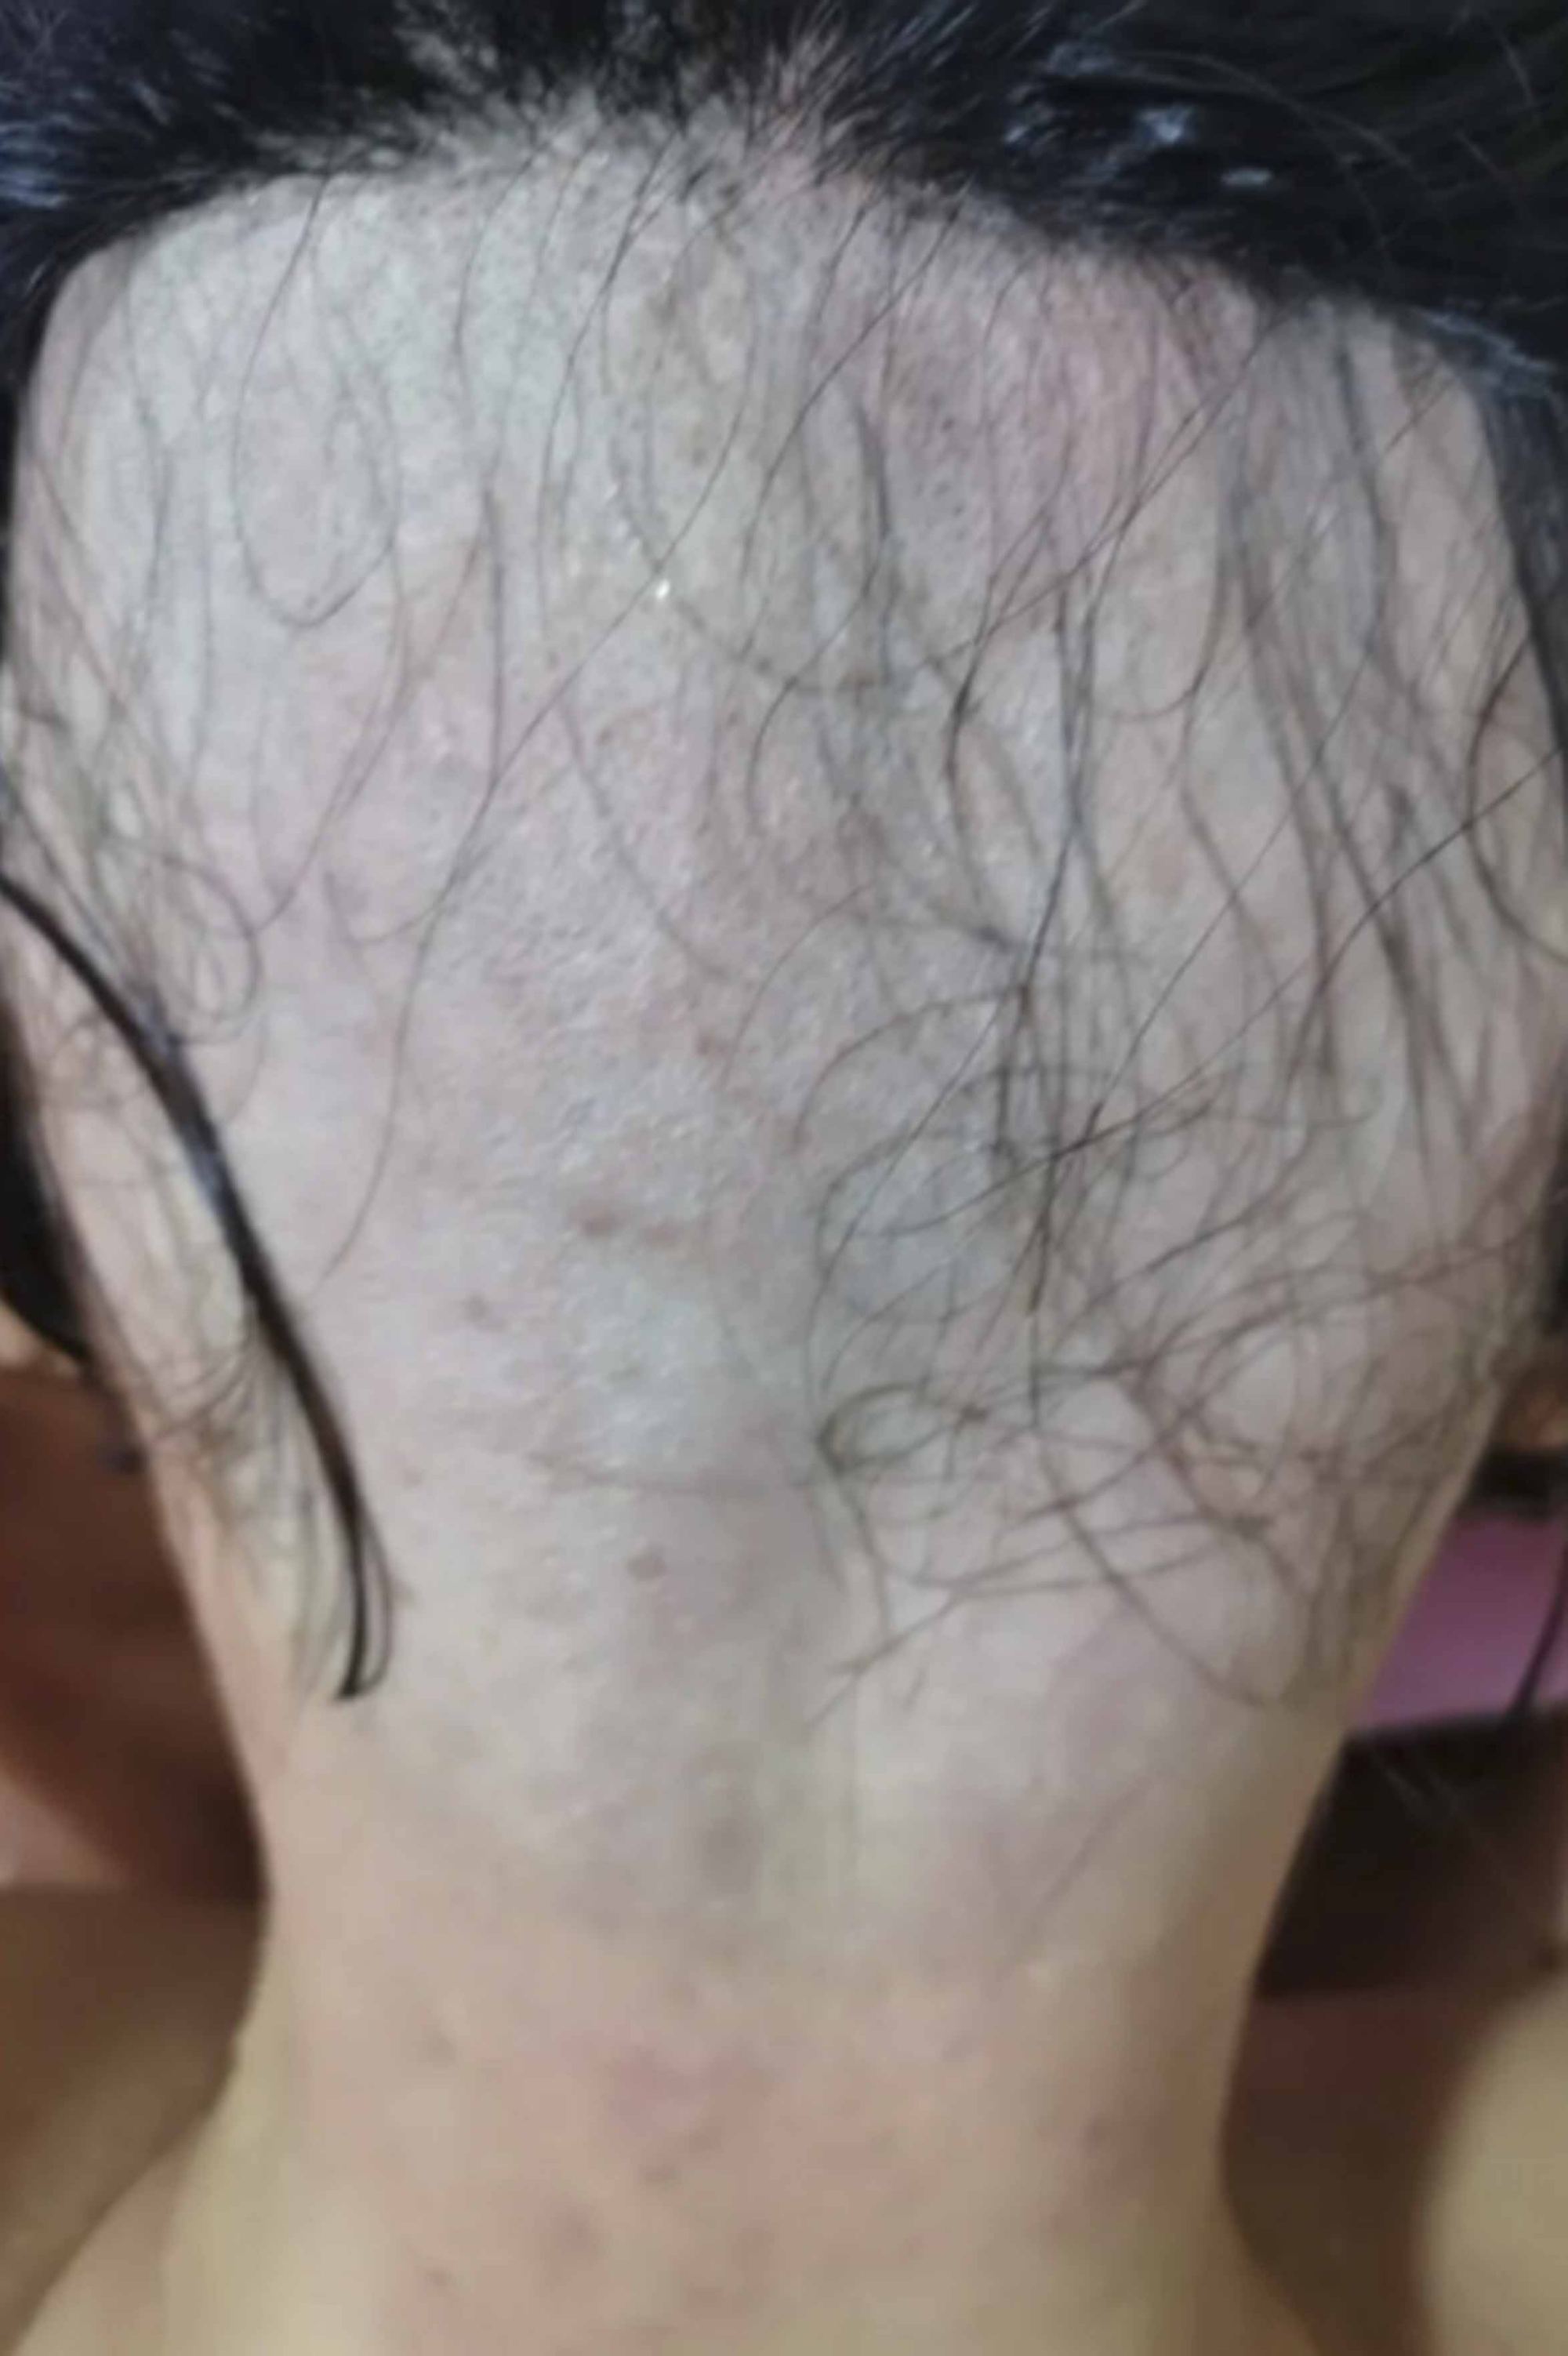 A Chinese woman who was tricked by an offer of cash to have a “short’ haircut ended up half bald before discovering she had been videoed for a sleazy, head- shaving fetish website. Photo: Thepaper